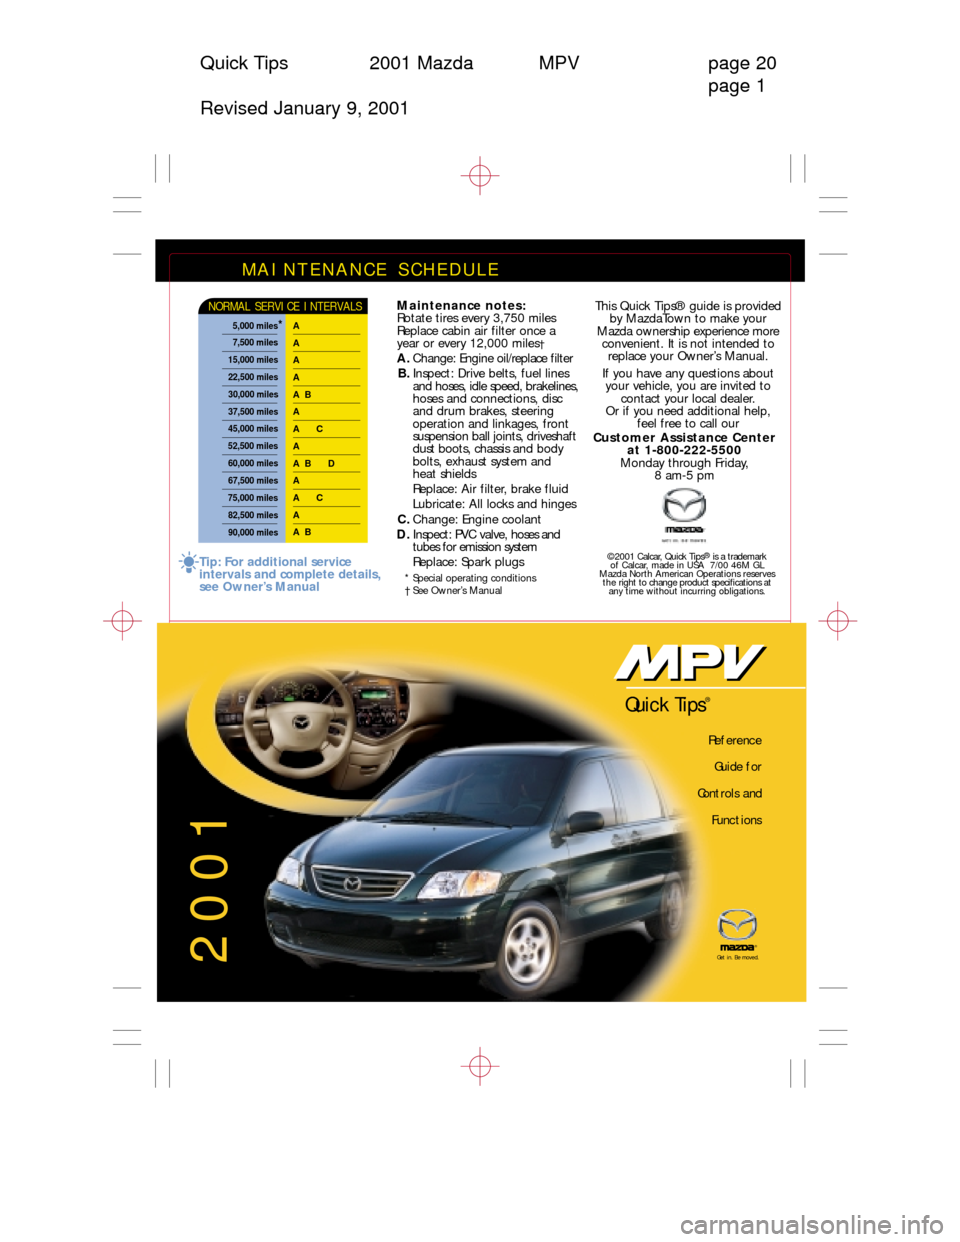 MAZDA MODEL MPV 2001  Quick Tips (in English) Quick Tips 2001 Mazda MPV page 20
page 1
Revised January 9, 2001
MAINTENANCE SCHEDULE 
Maintenance notes:
Rotate tires every 3,750 miles
Replace cabin air filter once a 
year or every 12,000 miles
†